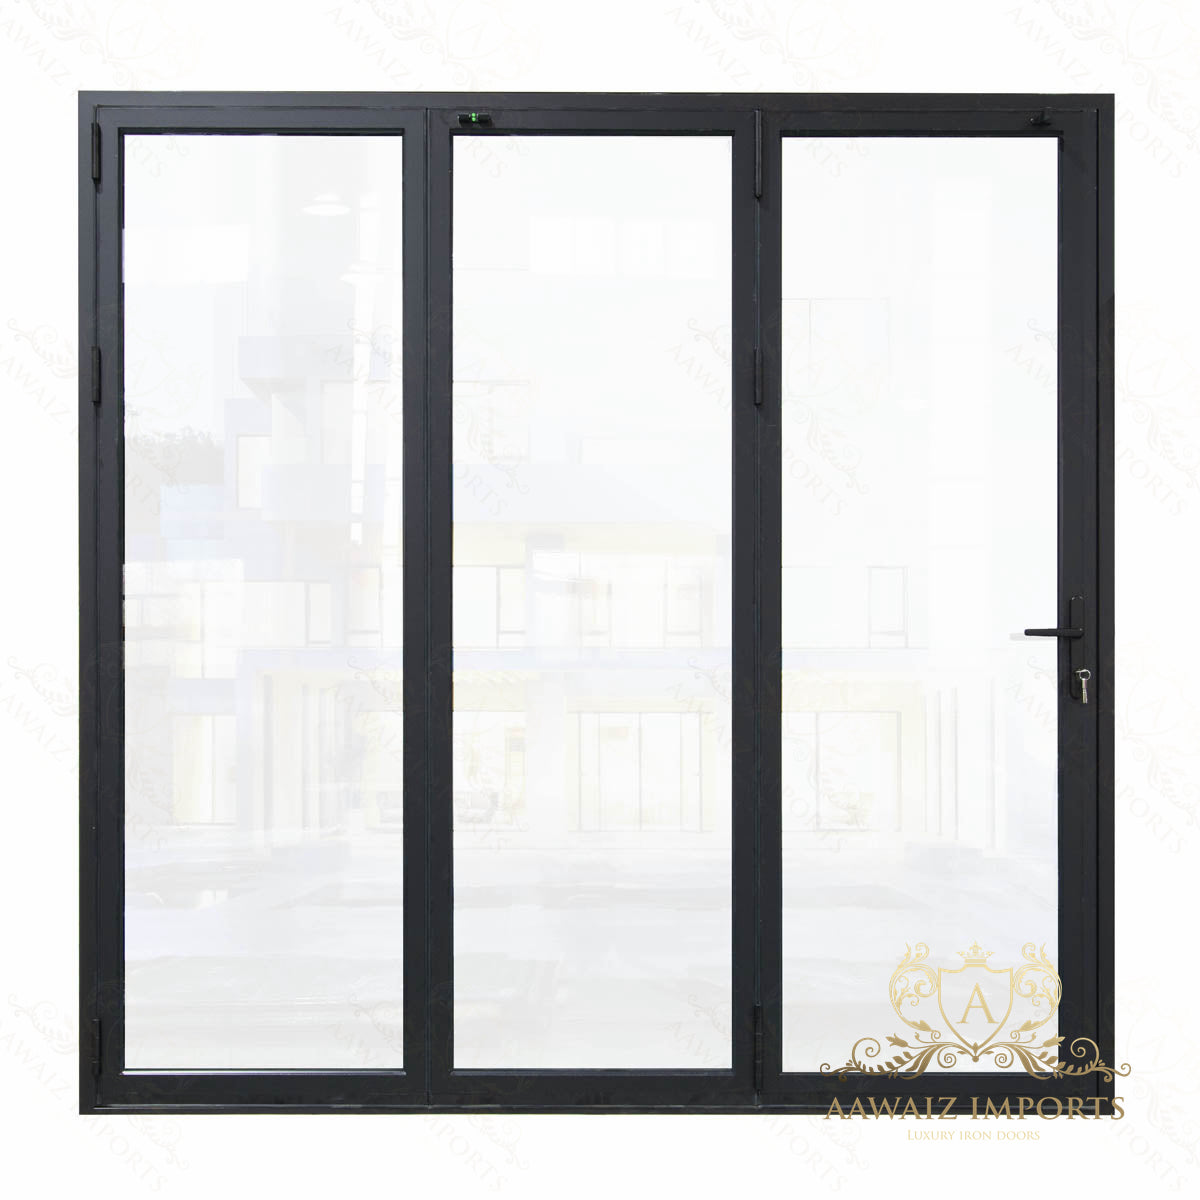 8 Ft Wide By 7 Ft Tall (96" By 84") Aluminum Bi Fold Patio Door Outswing  Thermal Break Insulated Matt Black Finish